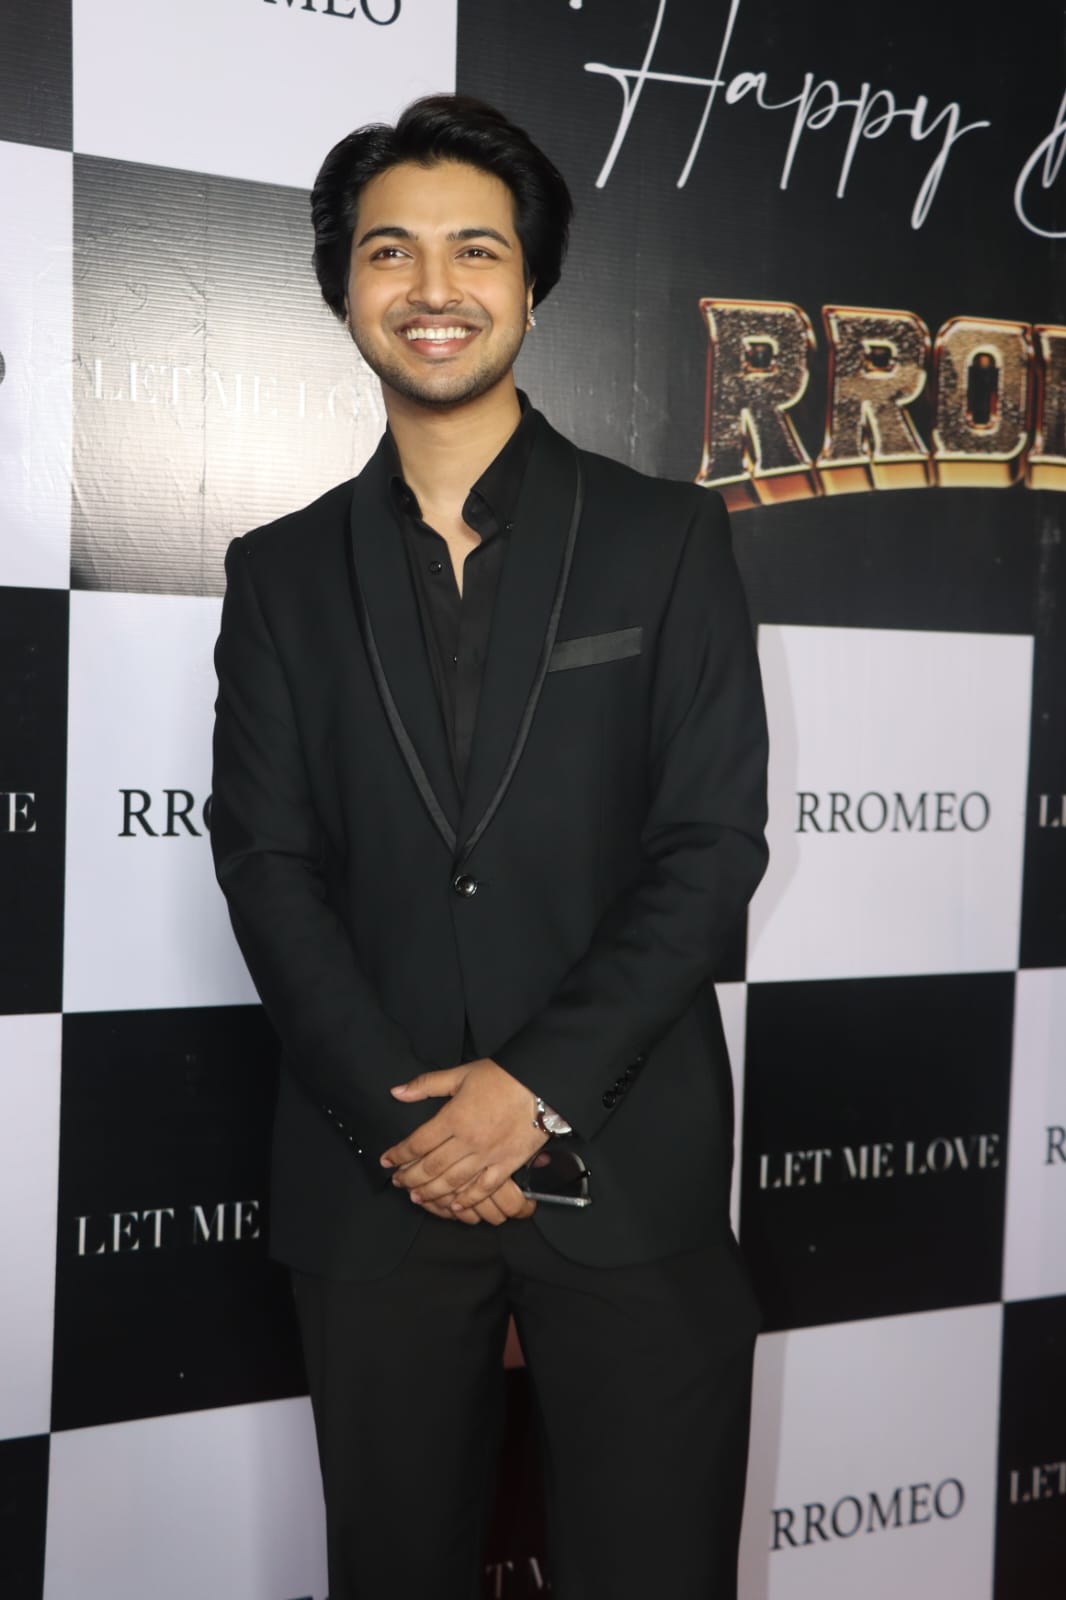 Youth sensation Rromeo launches Romantic Party Anthem Aankhon Main from the album ‘Let Me Love’ on his grand birthday Celebration